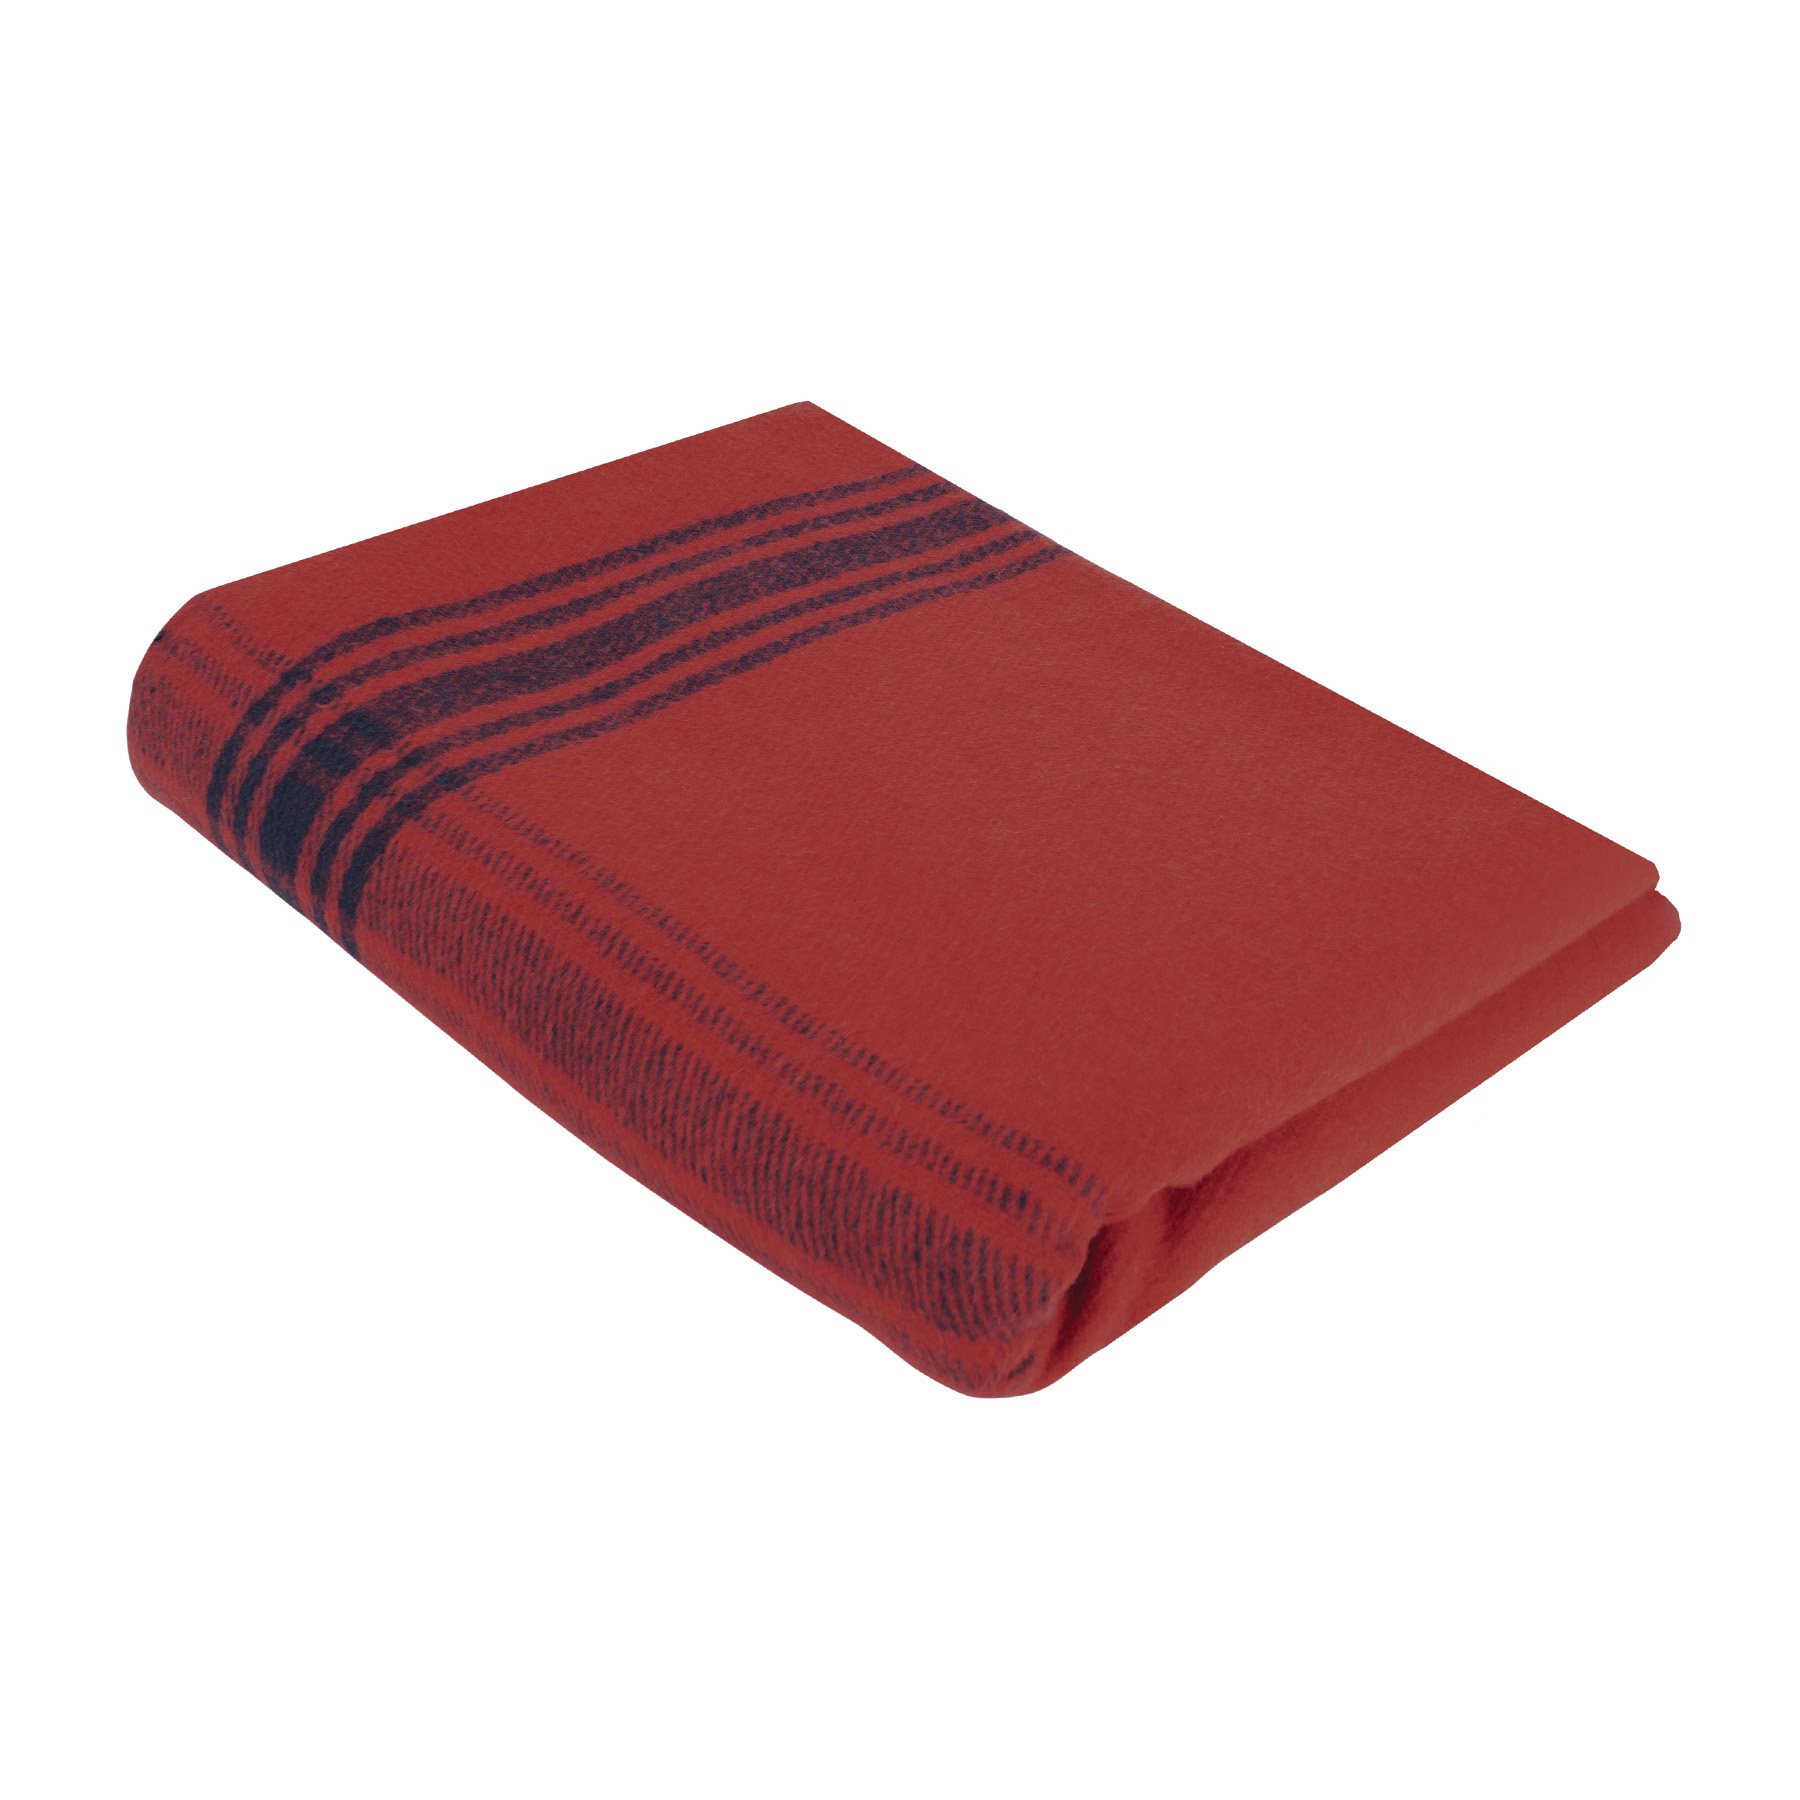 Striped Wool Blanket RED/NAVY BLUE ROTHCO 11095 L-11